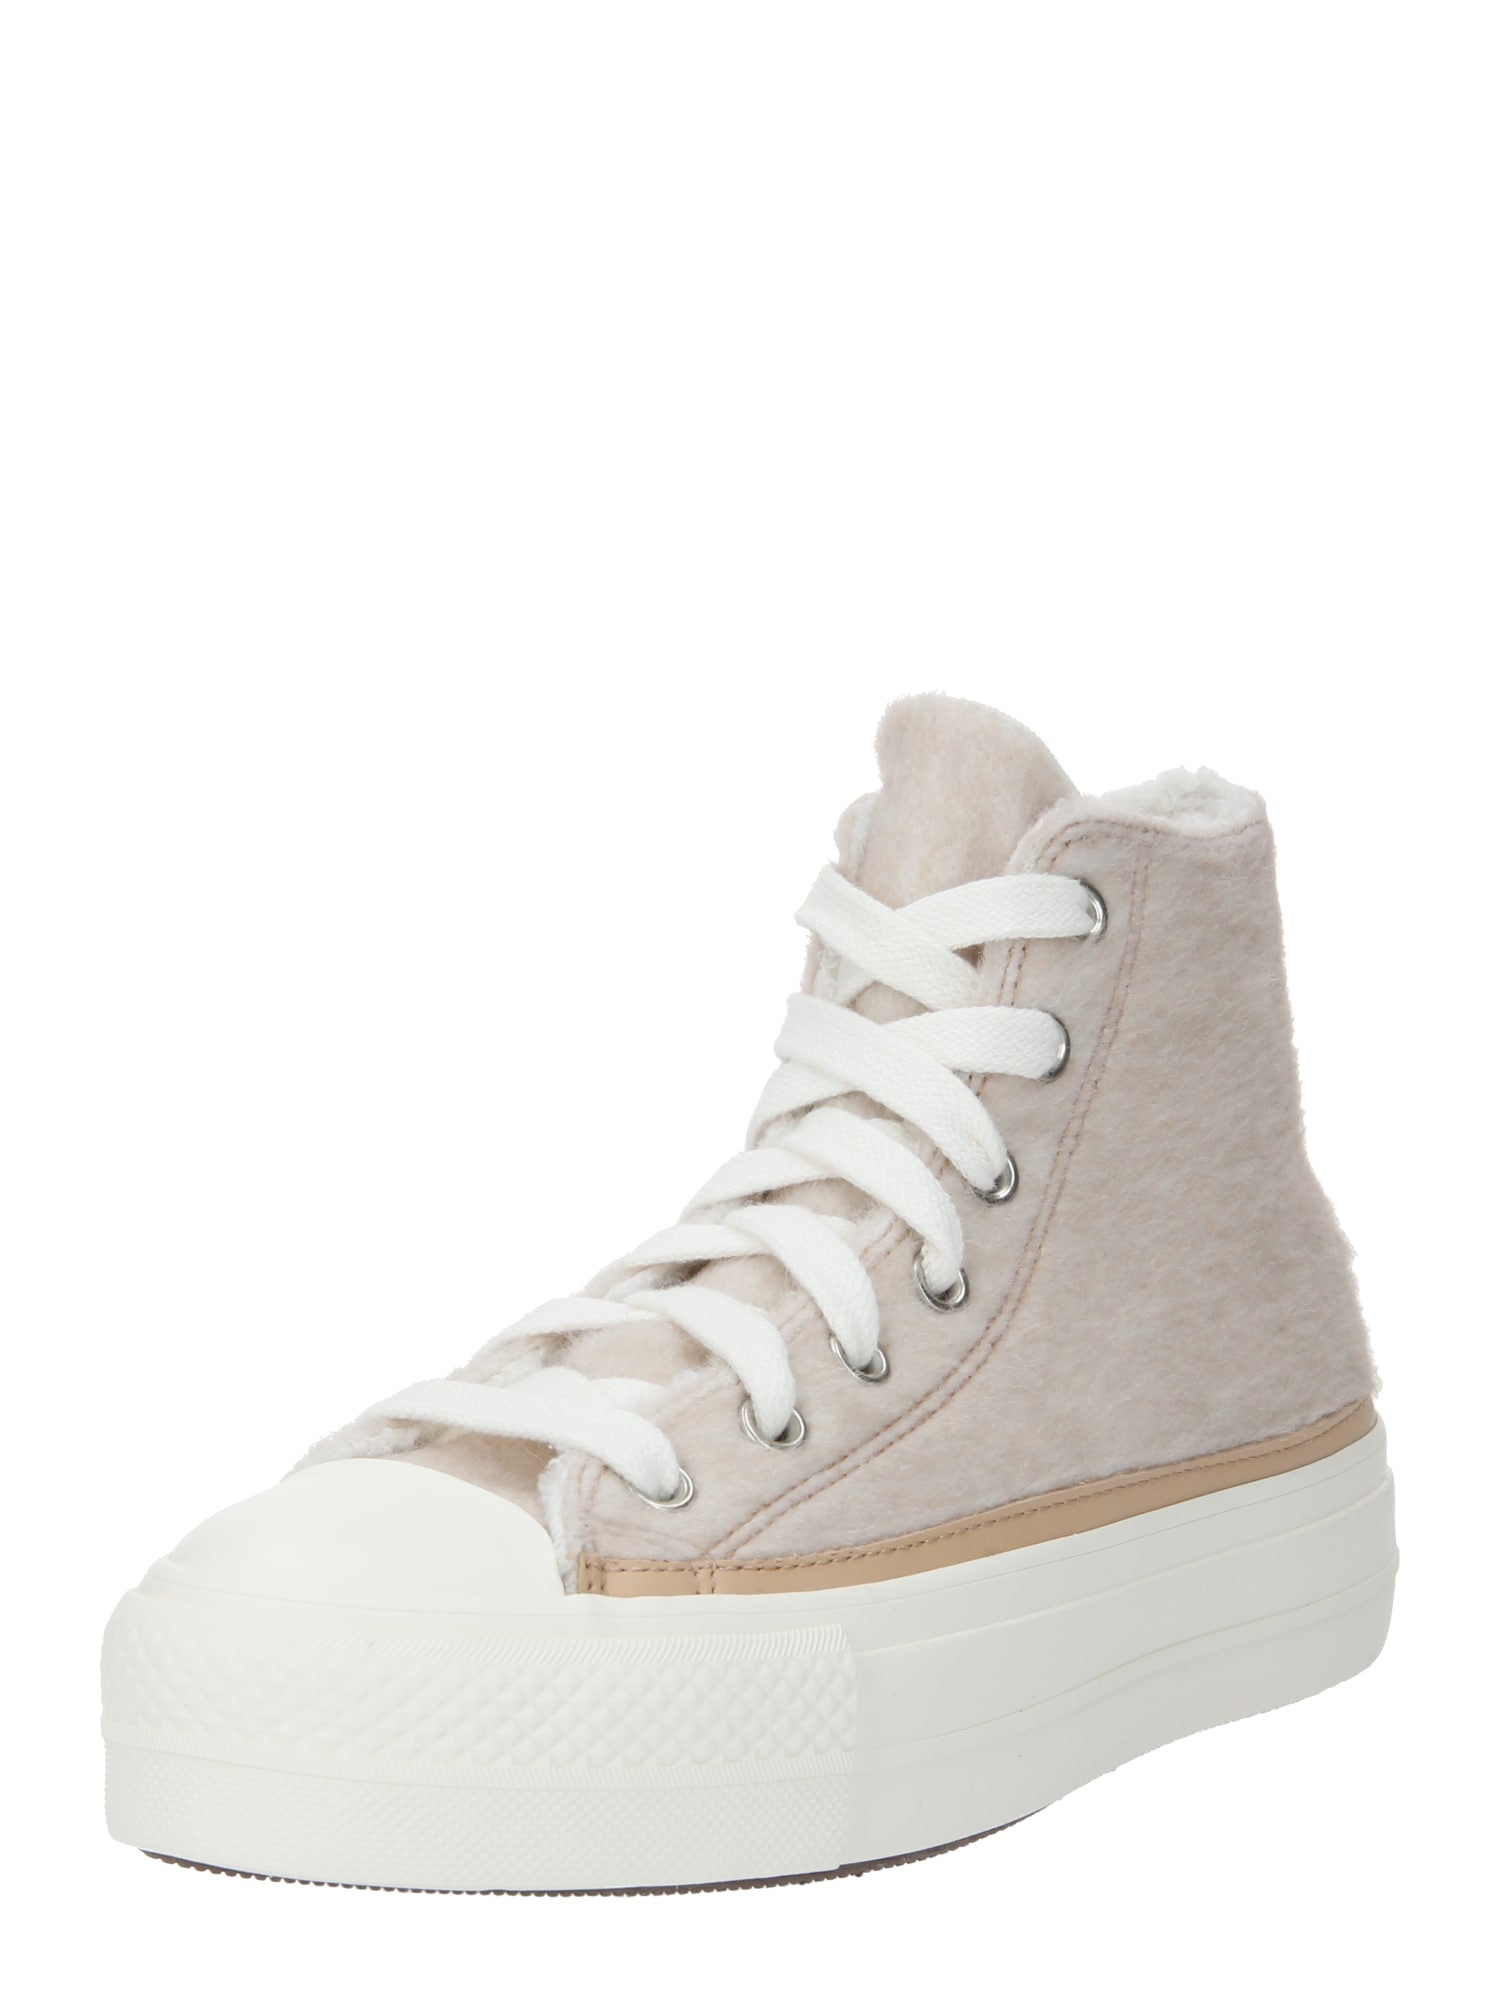 Converse Chuck Taylor All Star Lift Hoge sneakers Dames Beige